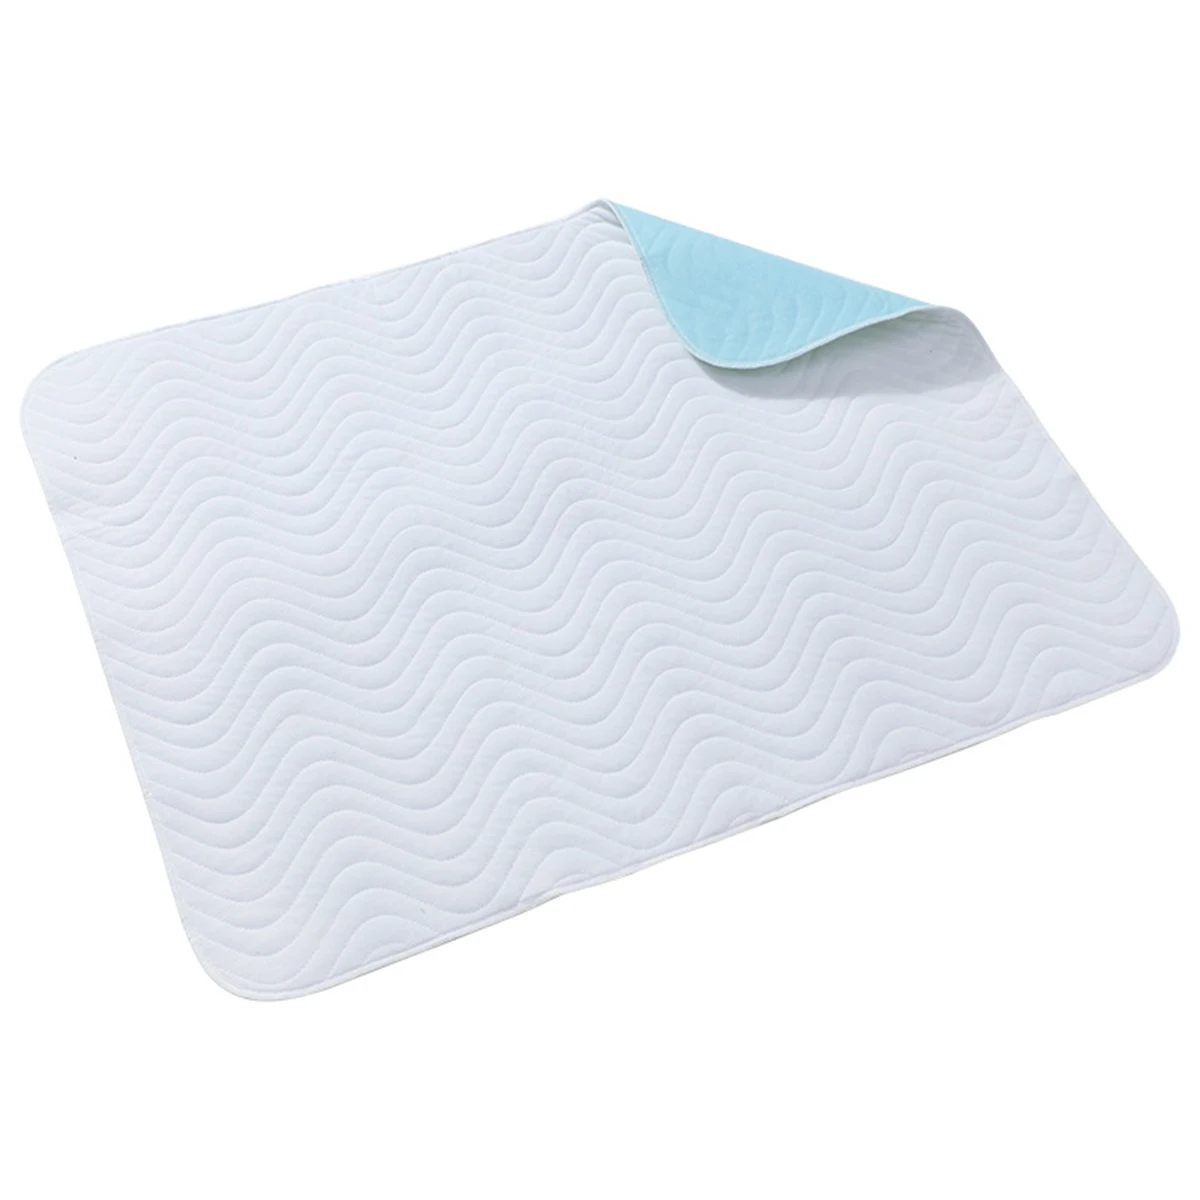 Hearth & Harbor Reusable & Washable Incontinence Bed Pads